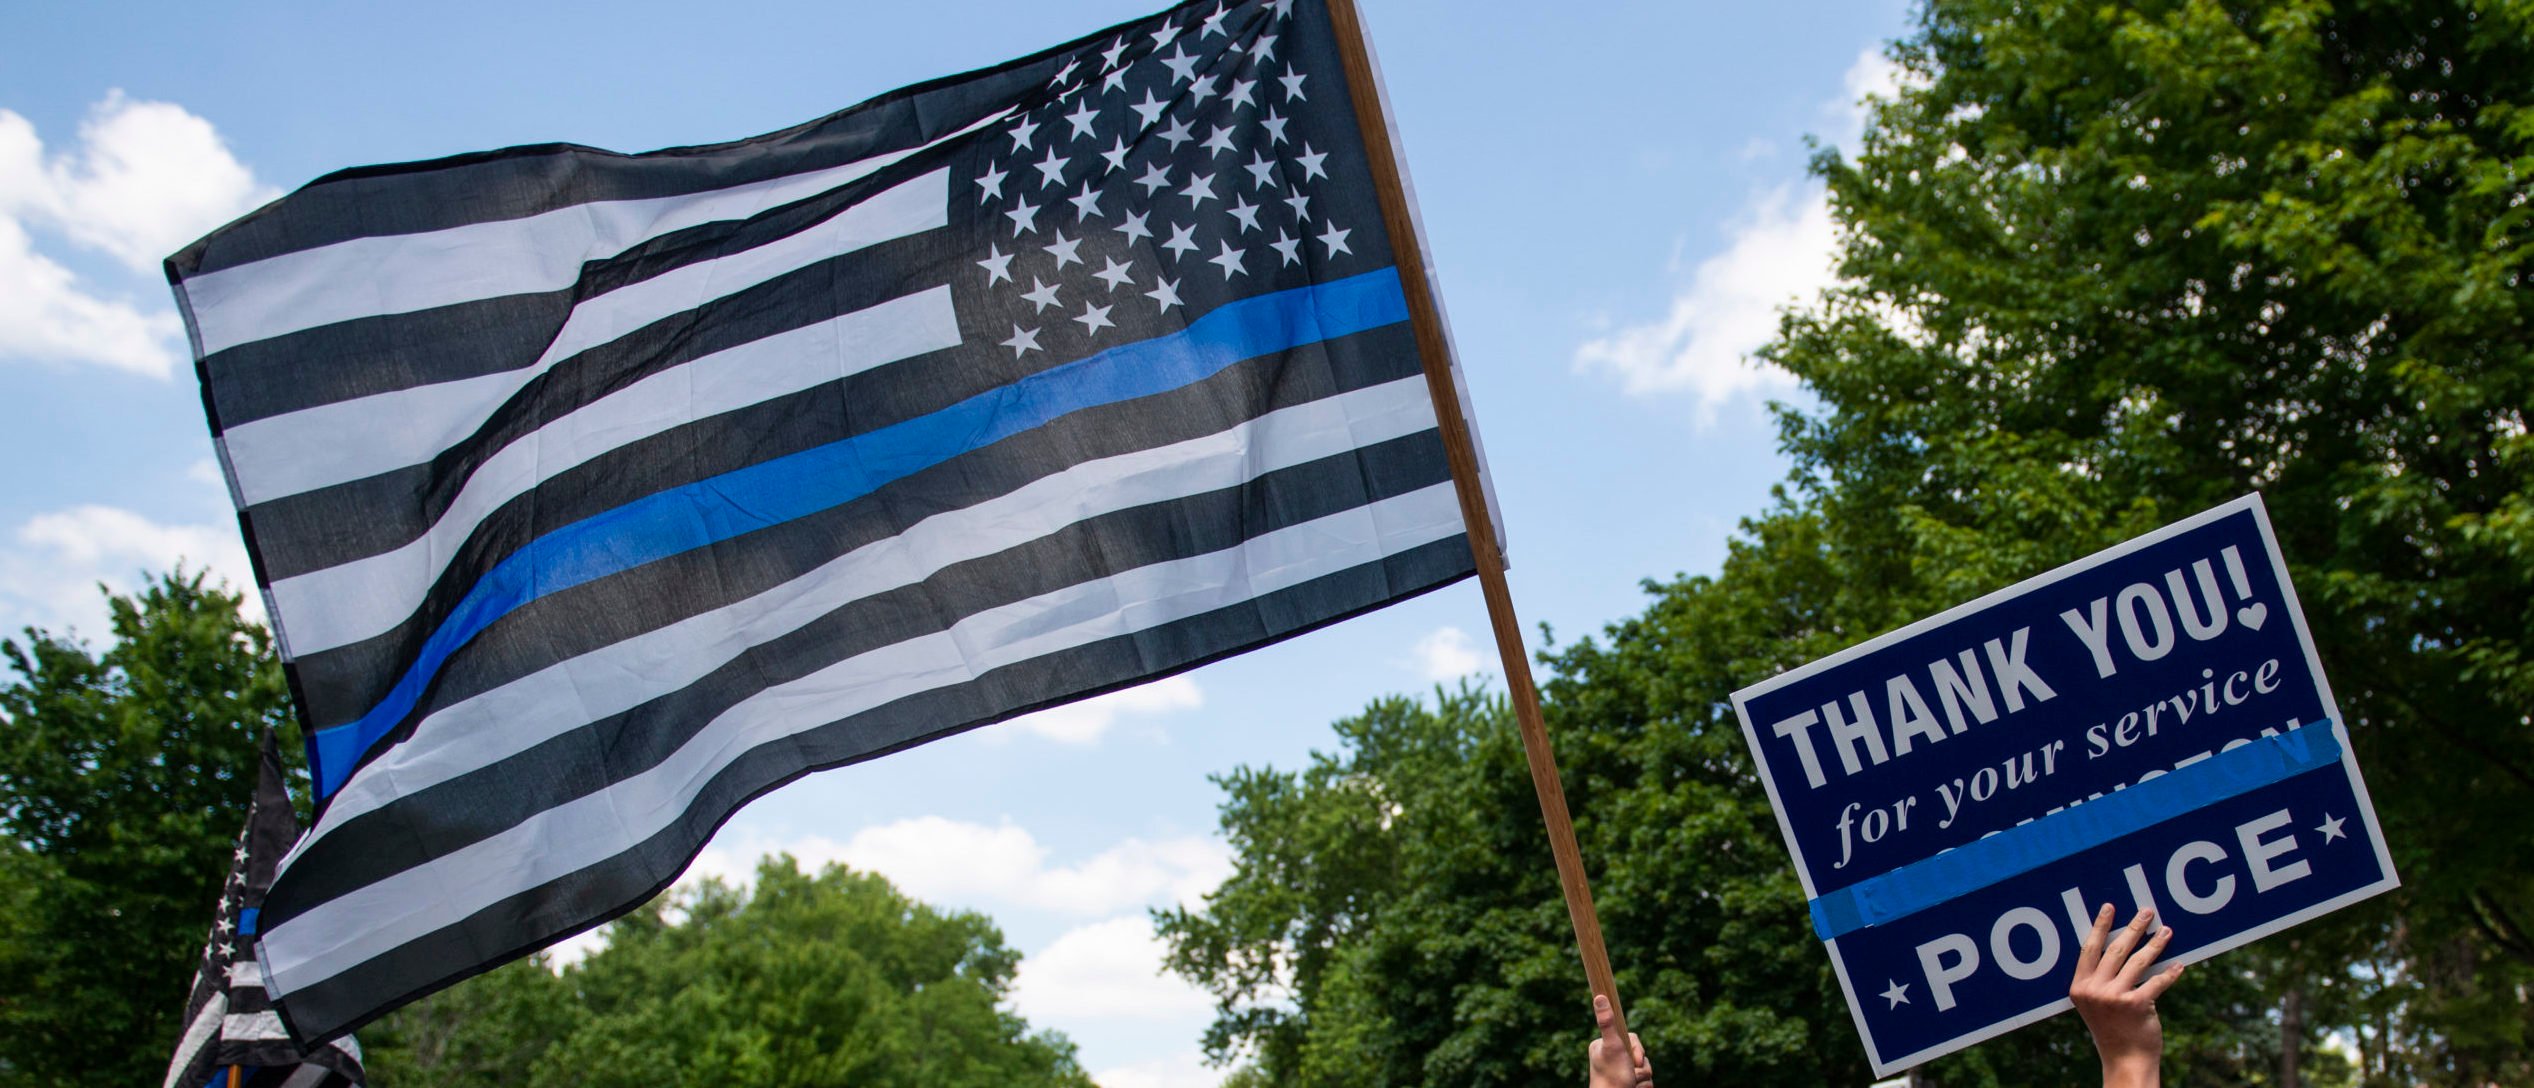 Politifact Agrees With Calling ‘Thin Blue Line’ Flag ‘Anti-Black Lives